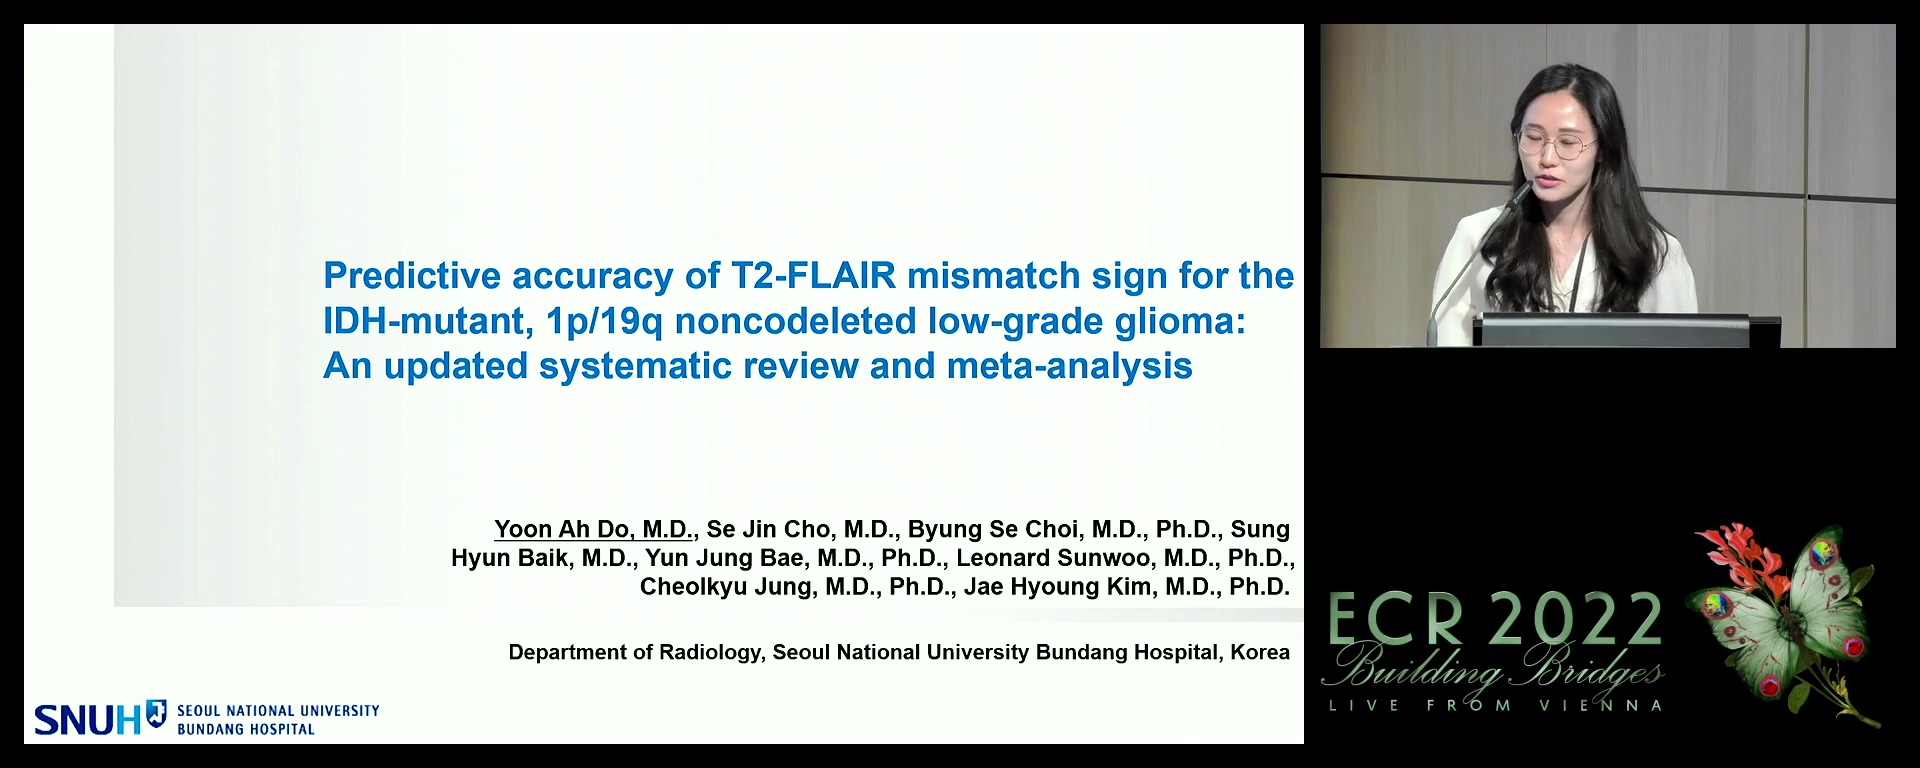 Predictive accuracy of T2-FLAIR mismatch sign for the IDH-mutant, 1p/19q non-codeleted low grade glioma: an updated systematic review and meta-analysis